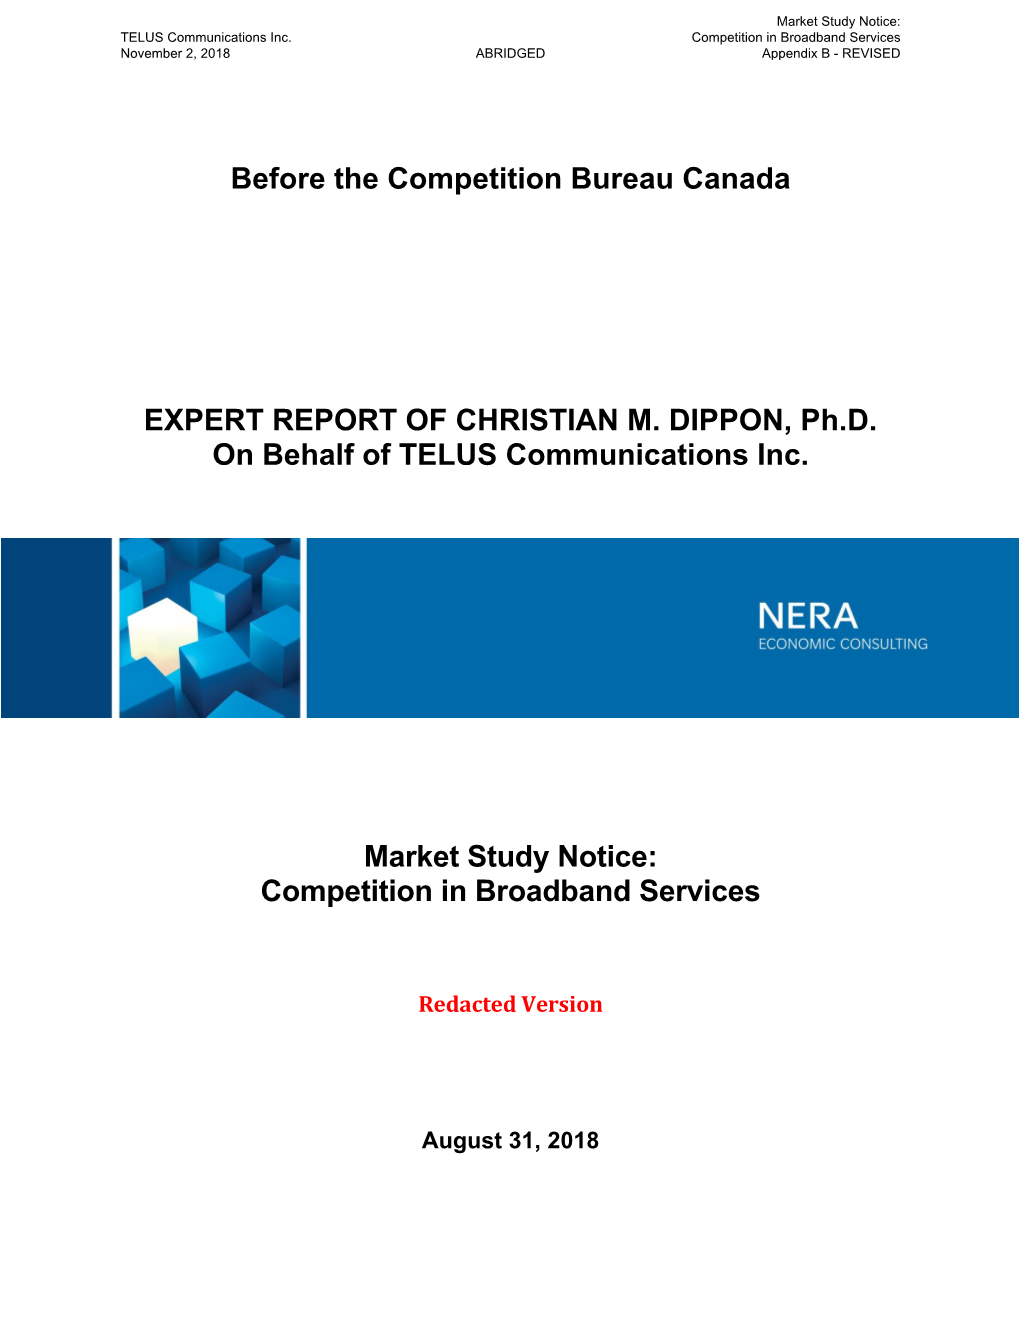 Before the Competition Bureau Canada EXPERT REPORT OF